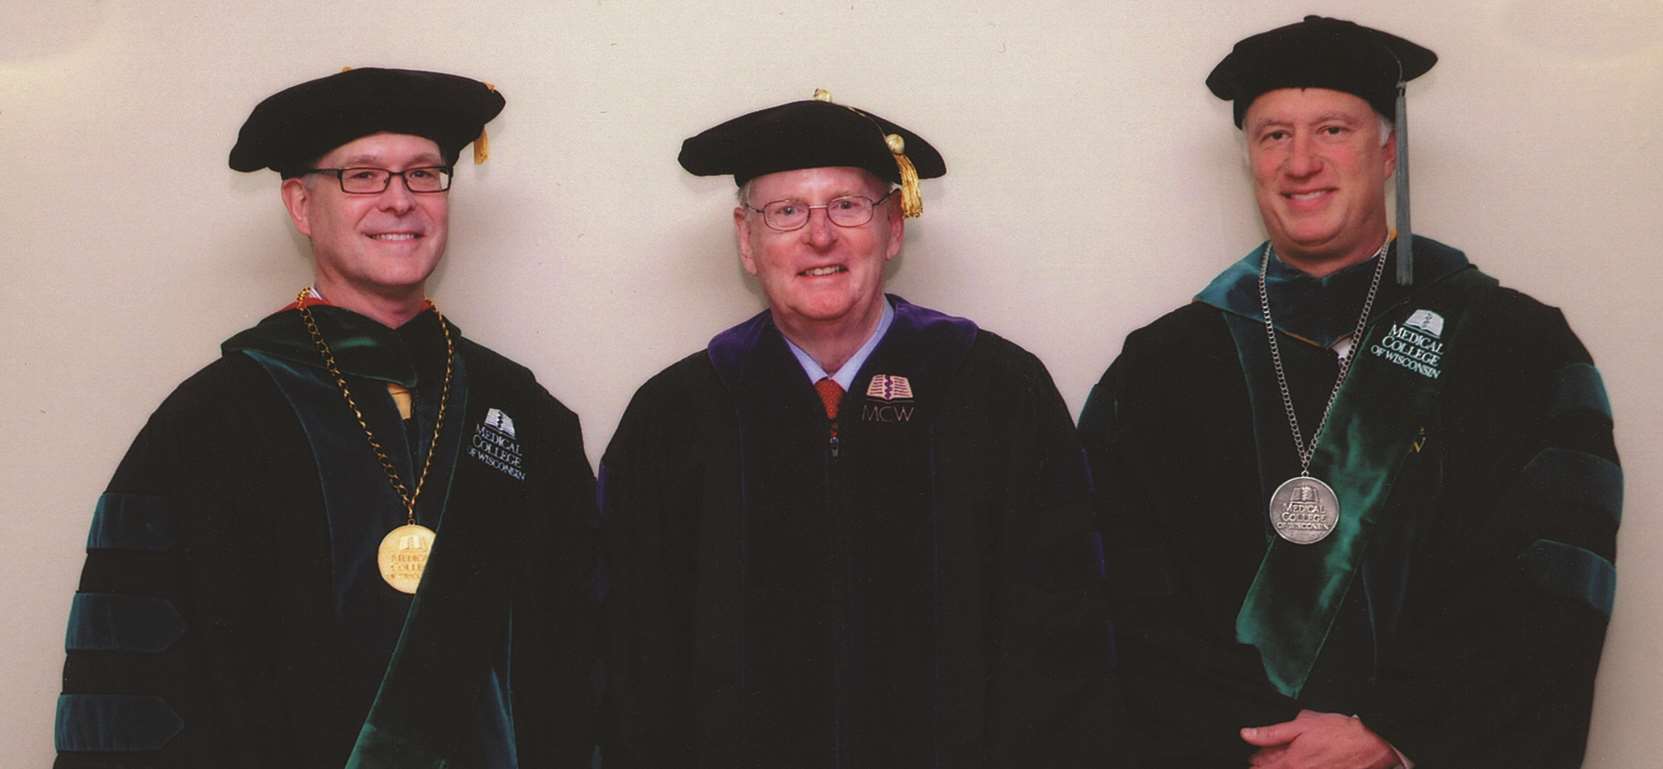 Mike Bolger receiving honorary degree at 2012 MCW Commencement ceremony